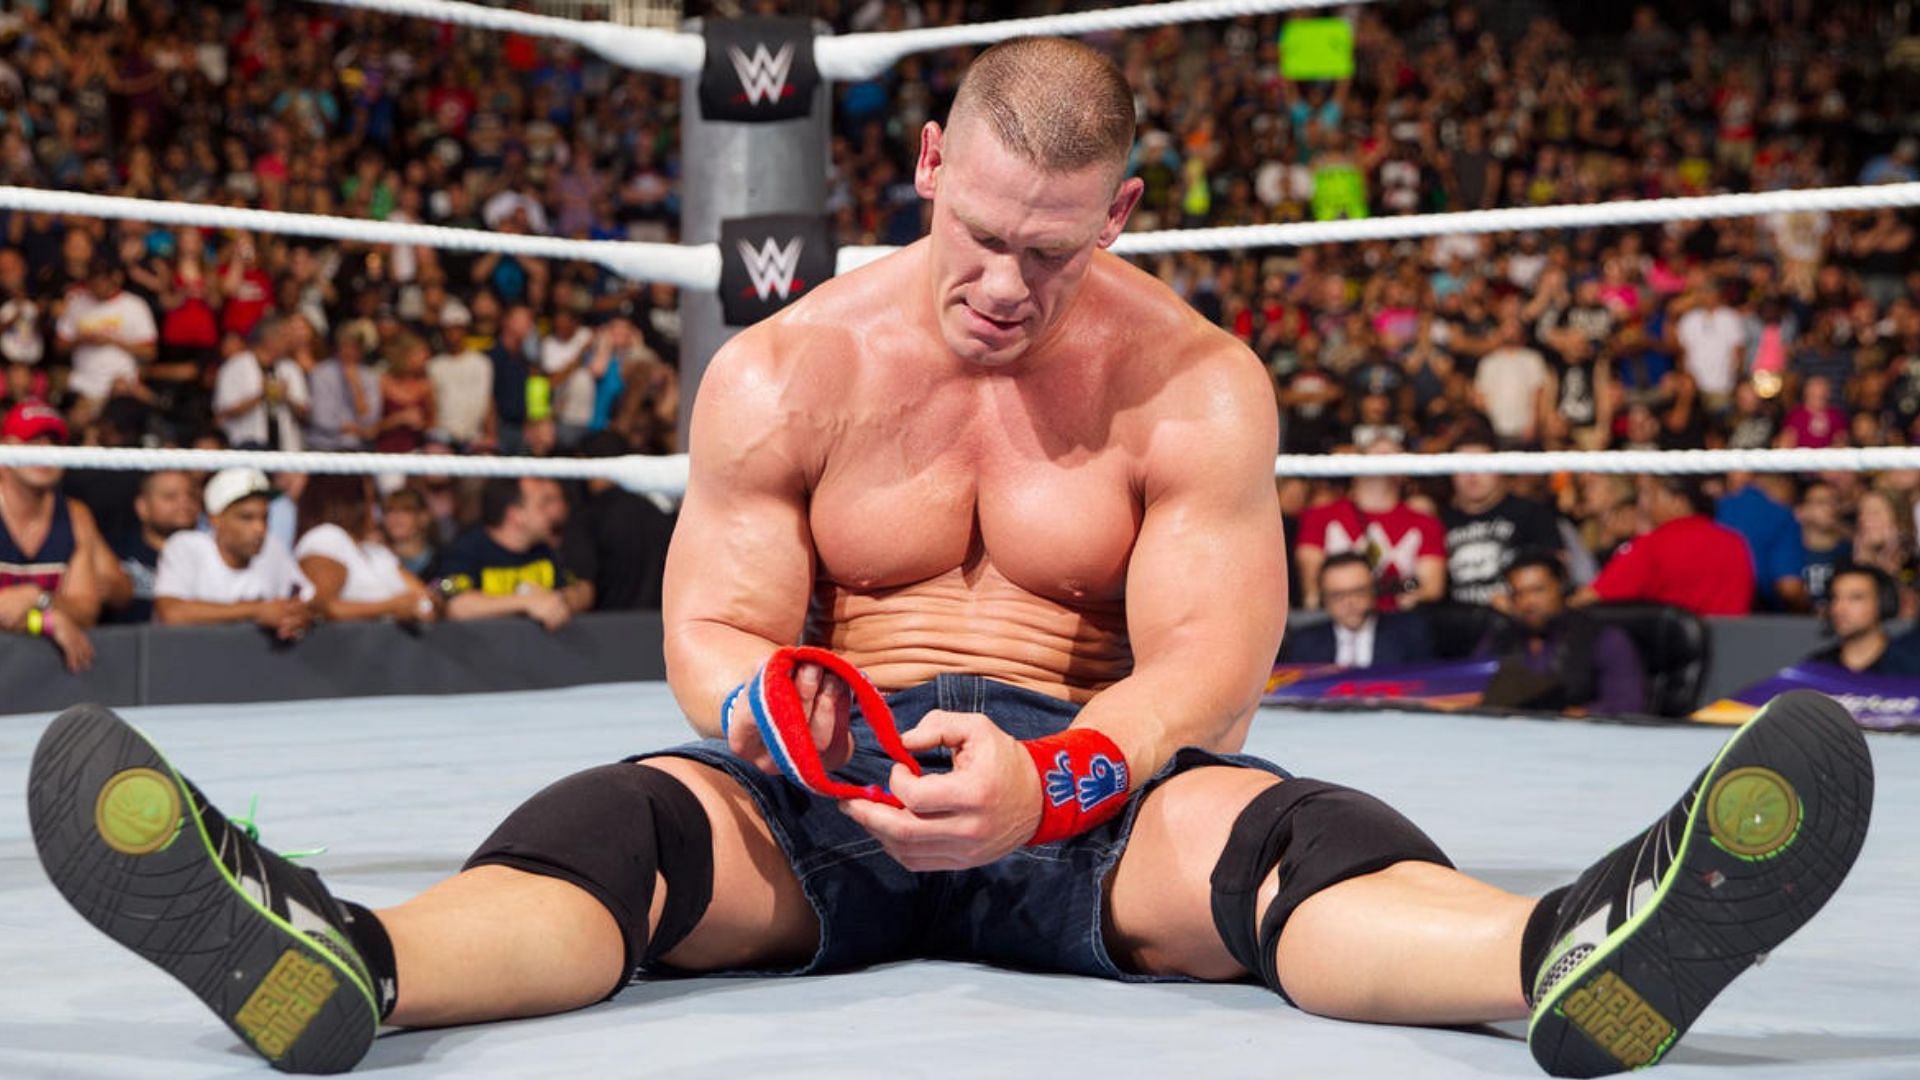 Cena lost to Austin Theory at last year